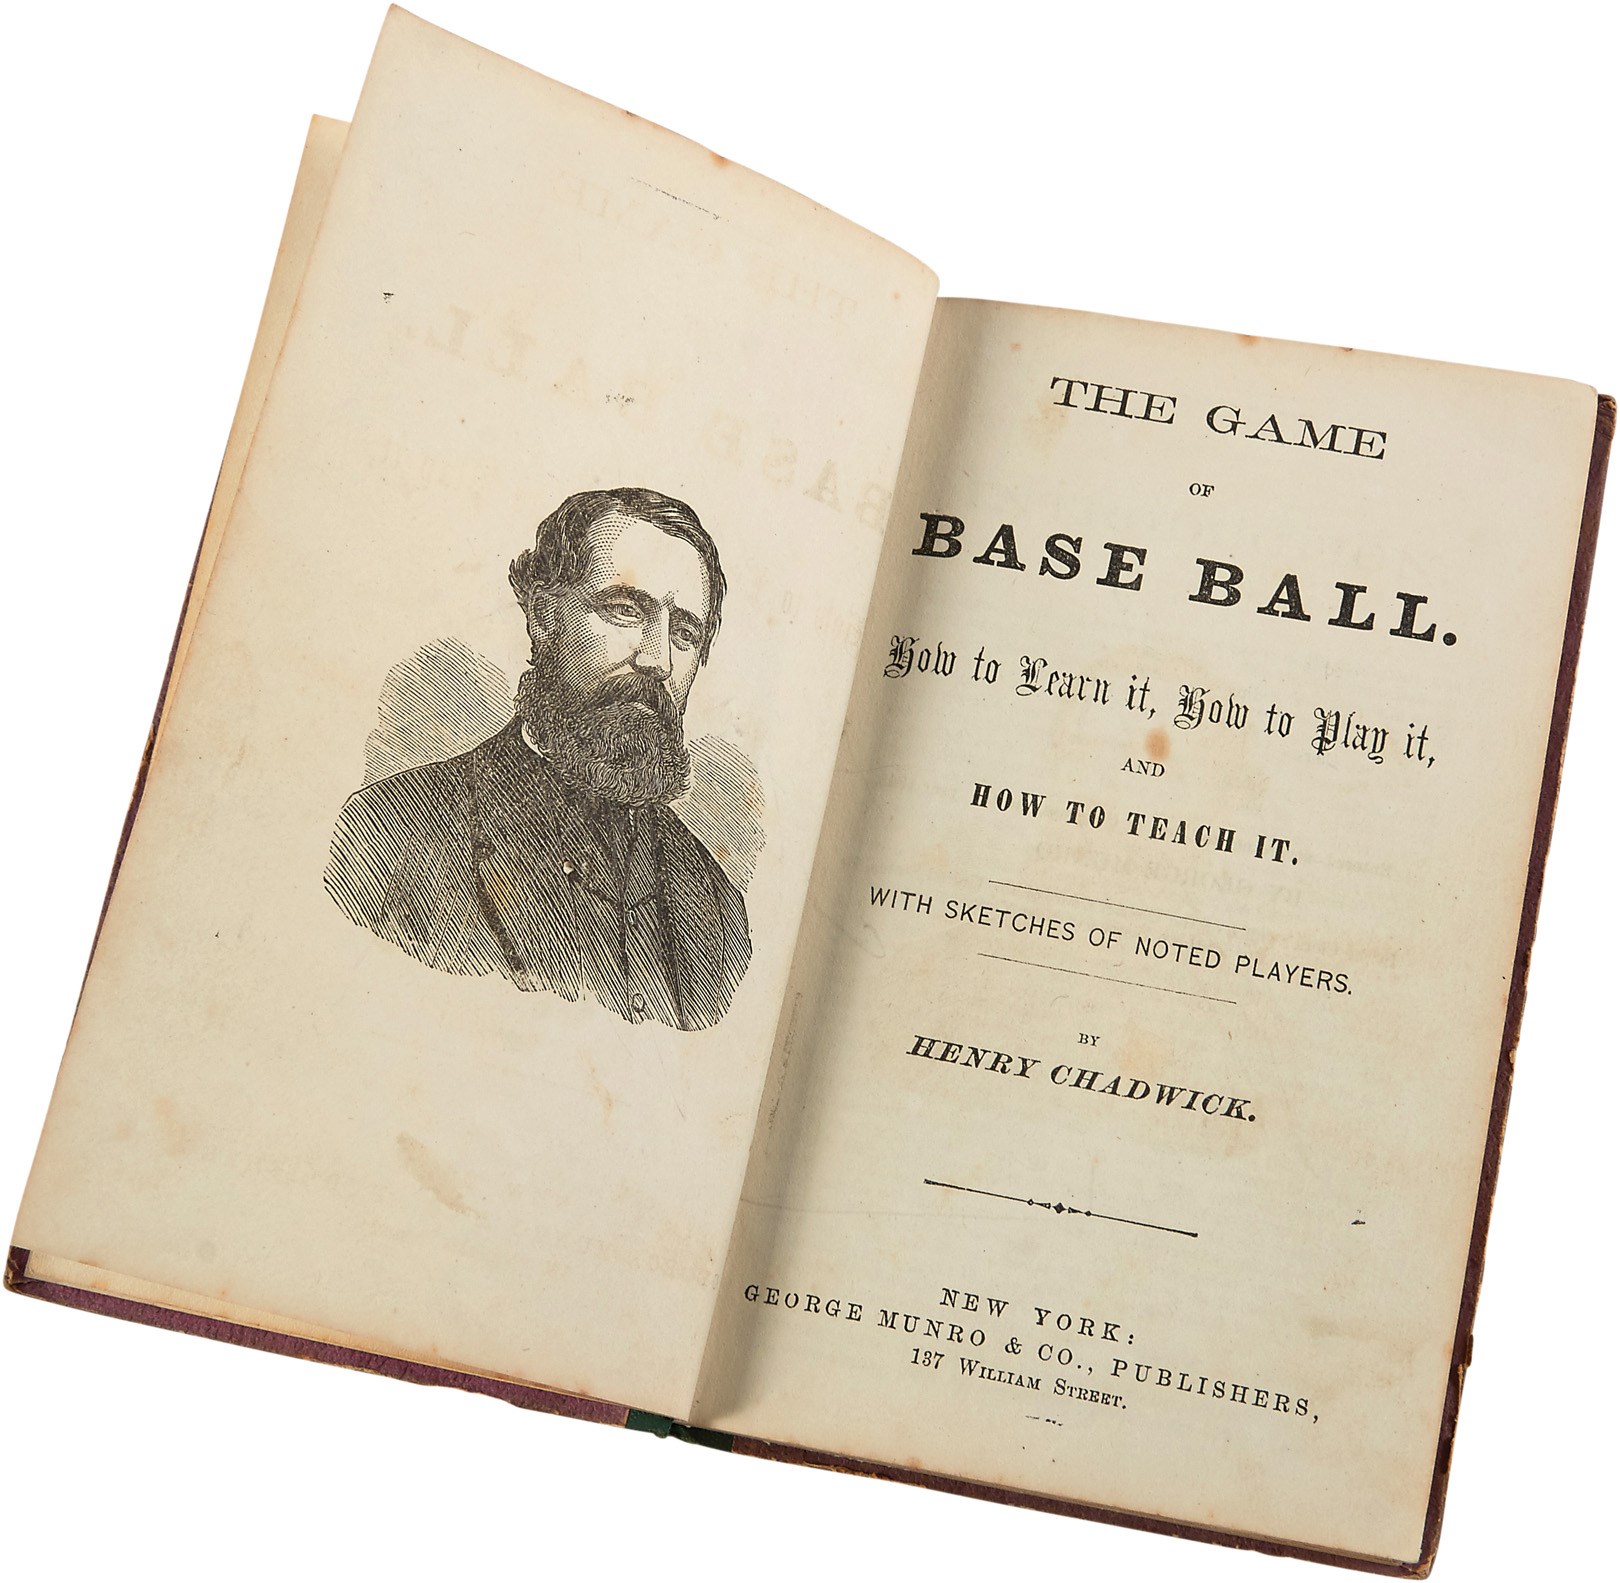 Early Baseball - 1868 First Edition "The Game of Baseball" by Henry Chadwick